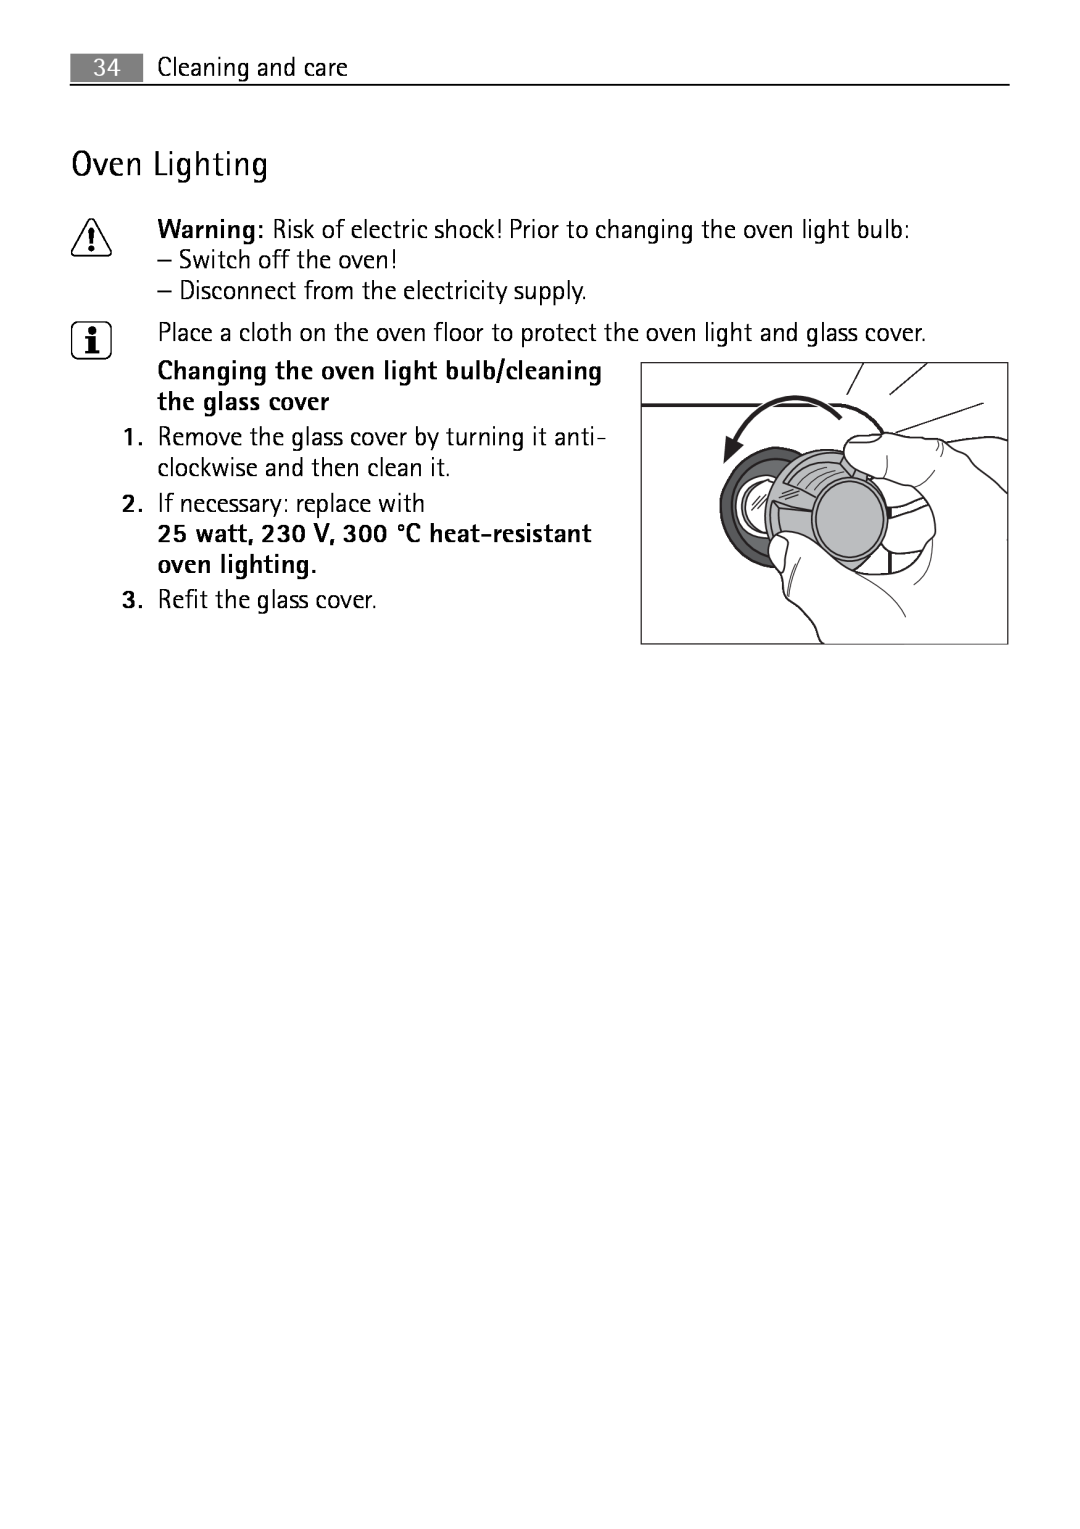 Electrolux B2100-5 user manual Oven Lighting, Changing the oven light bulb/cleaning the glass cover 